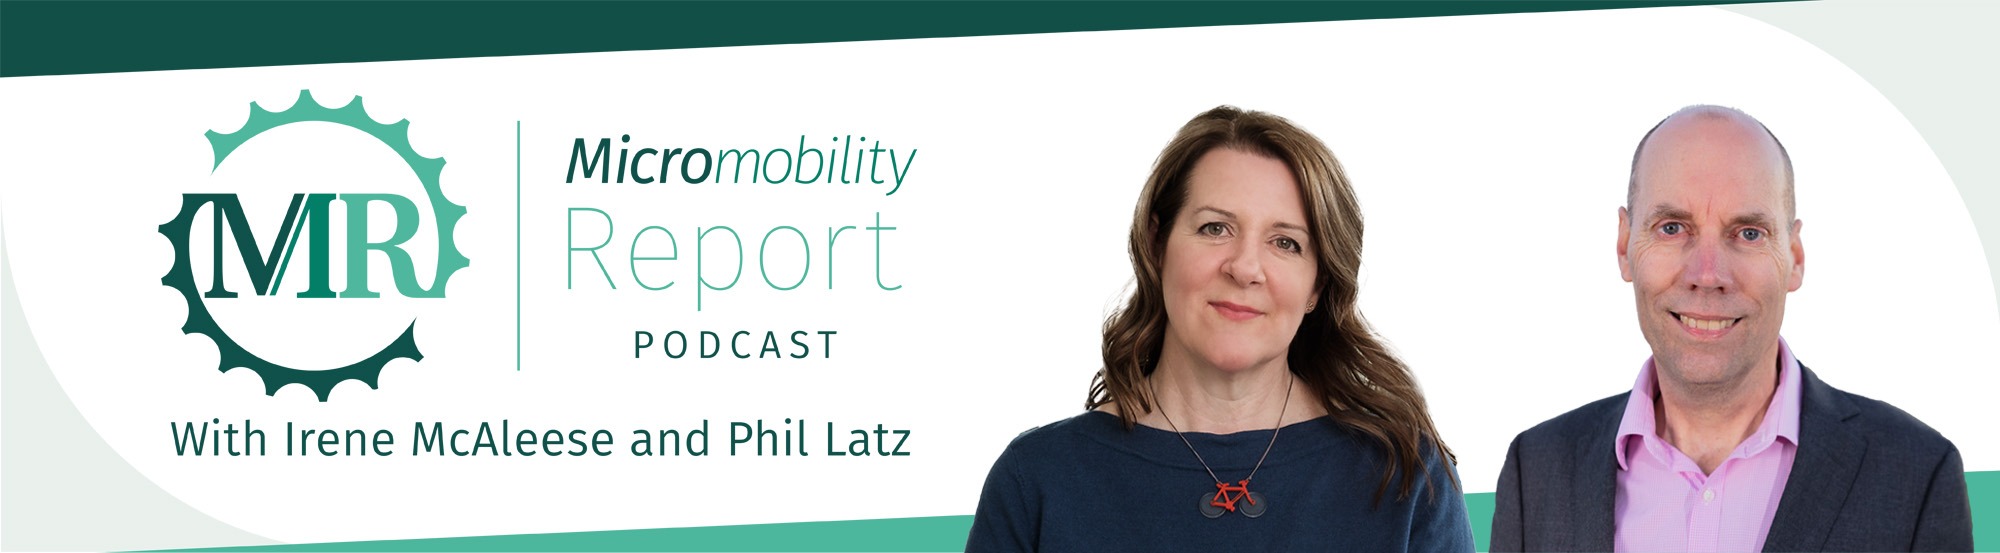 Micromobility Report Podcast